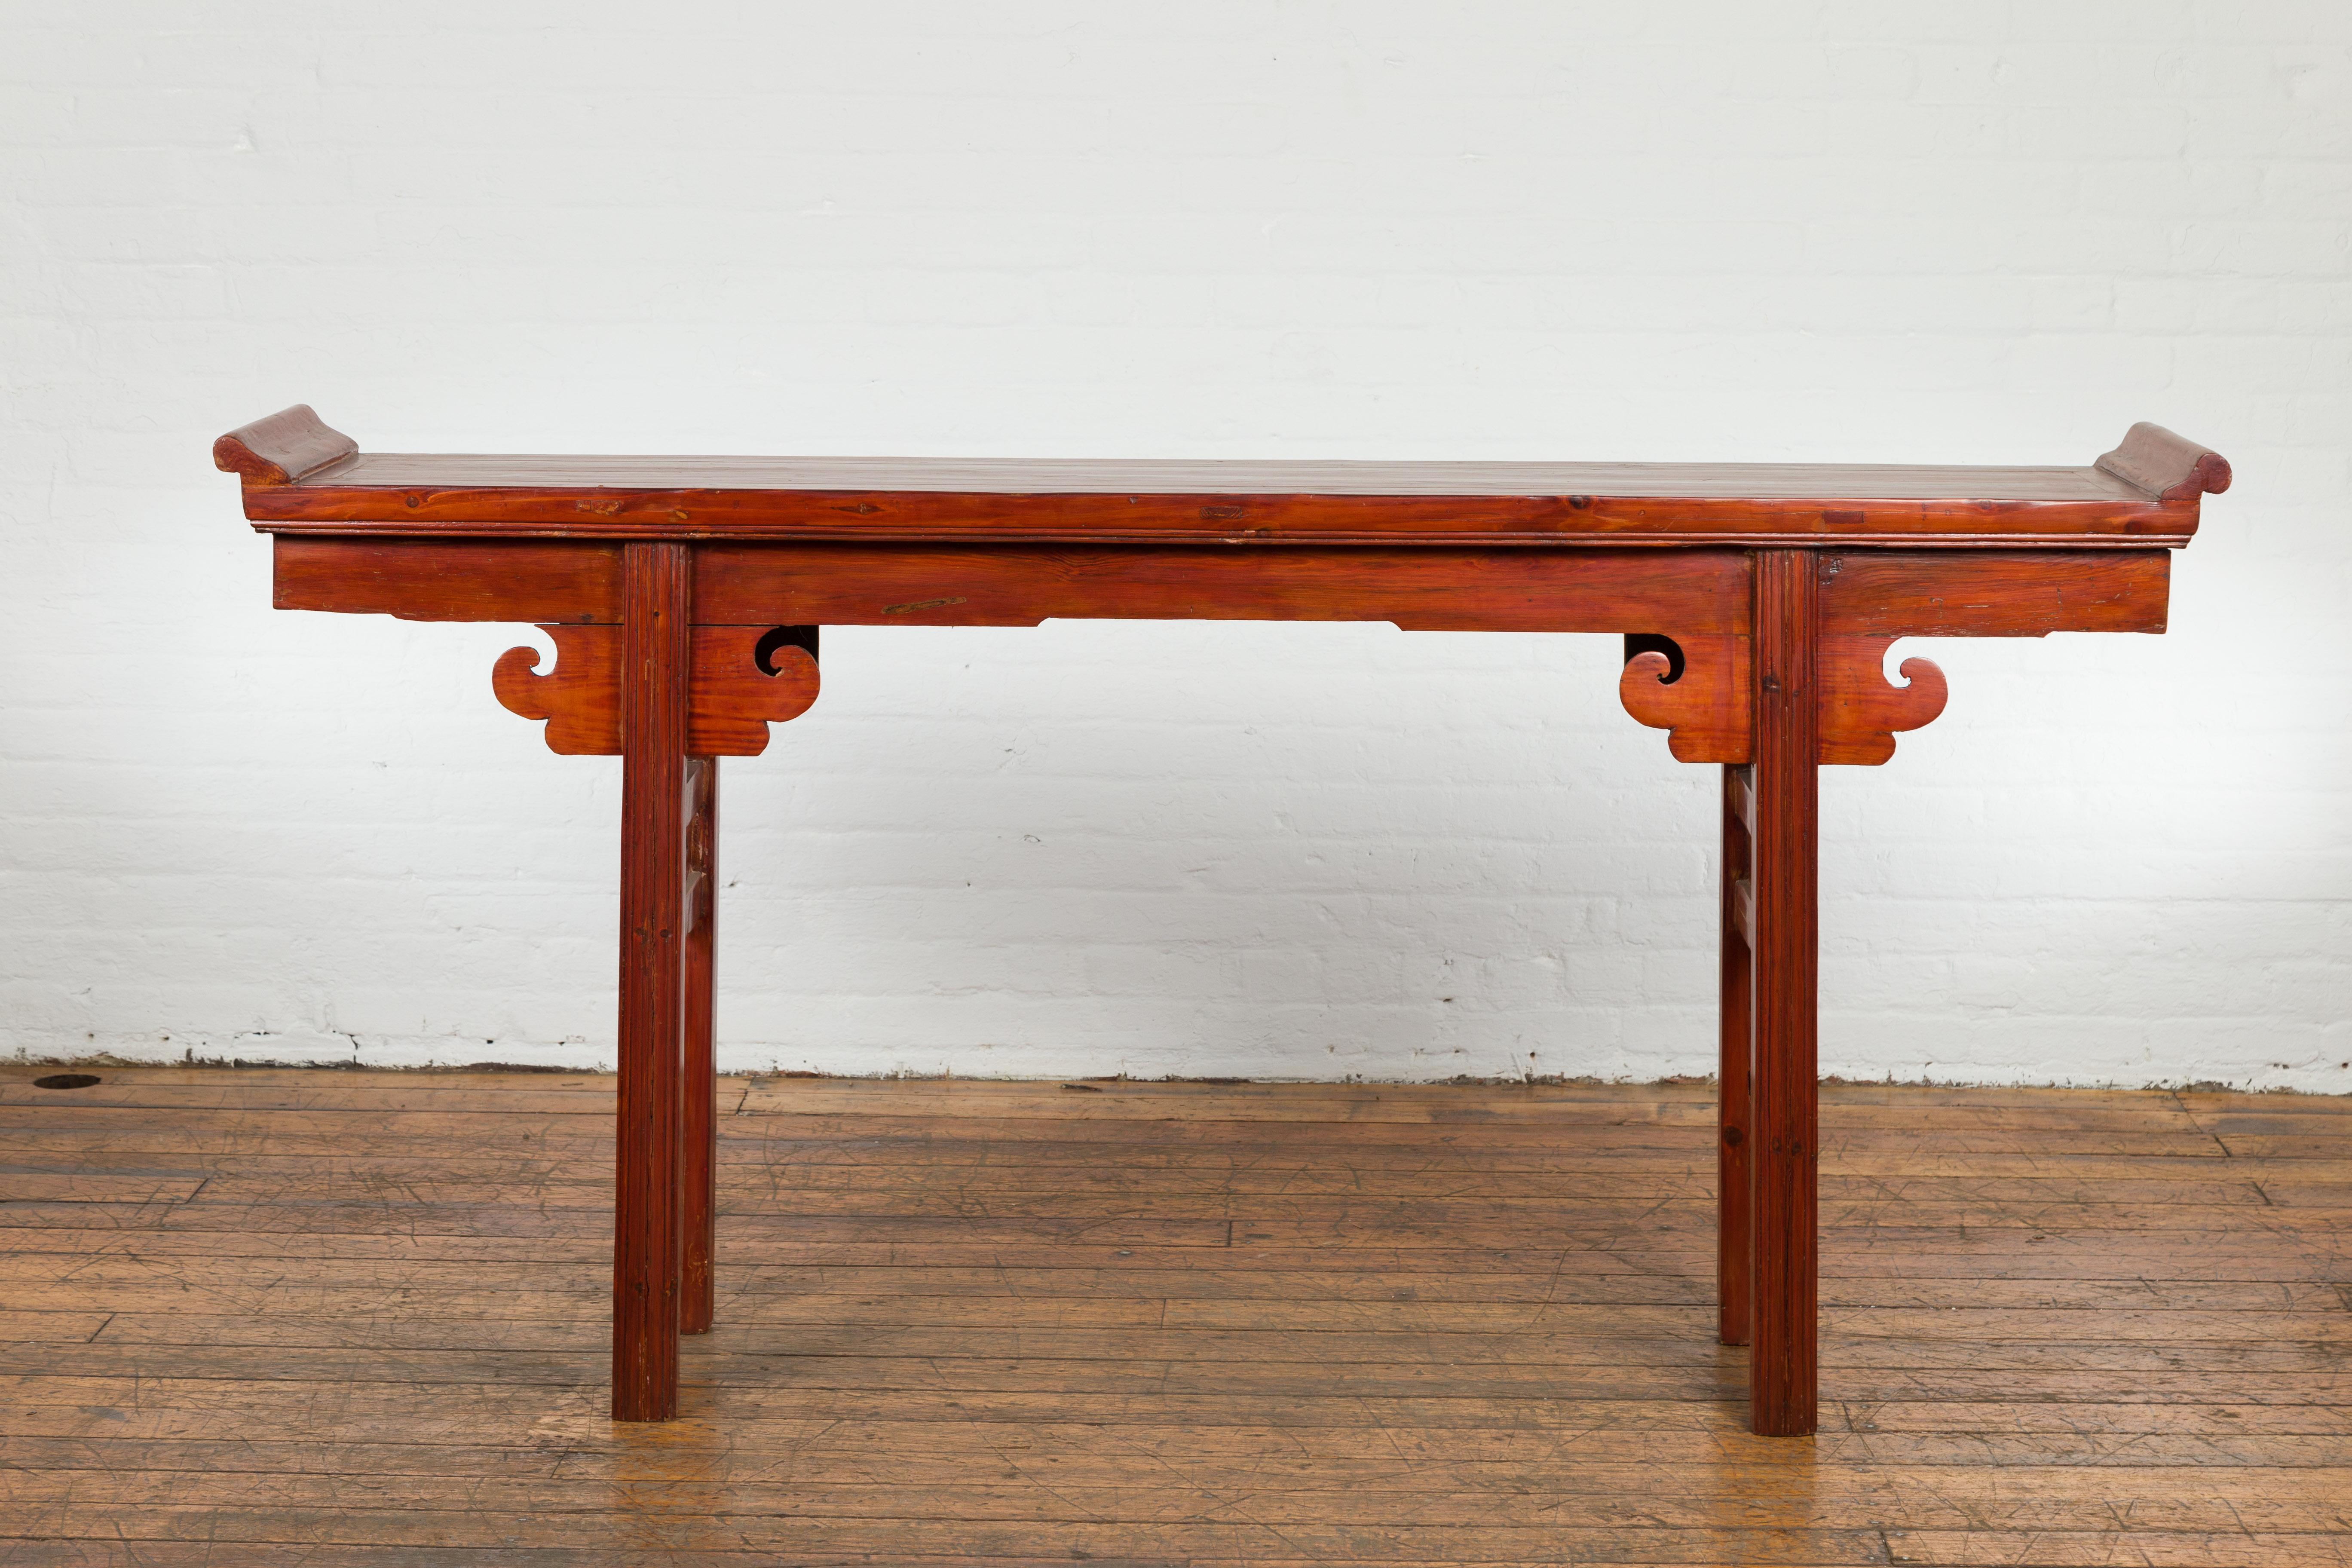 A Chinese Qing Dynasty period altar console table from the 19th century, with everted flanges, carved cloud motifs and orange, red and brown lacquer. Created in China during the Qing Dynasty period in the 19th century, this altar table attracts our